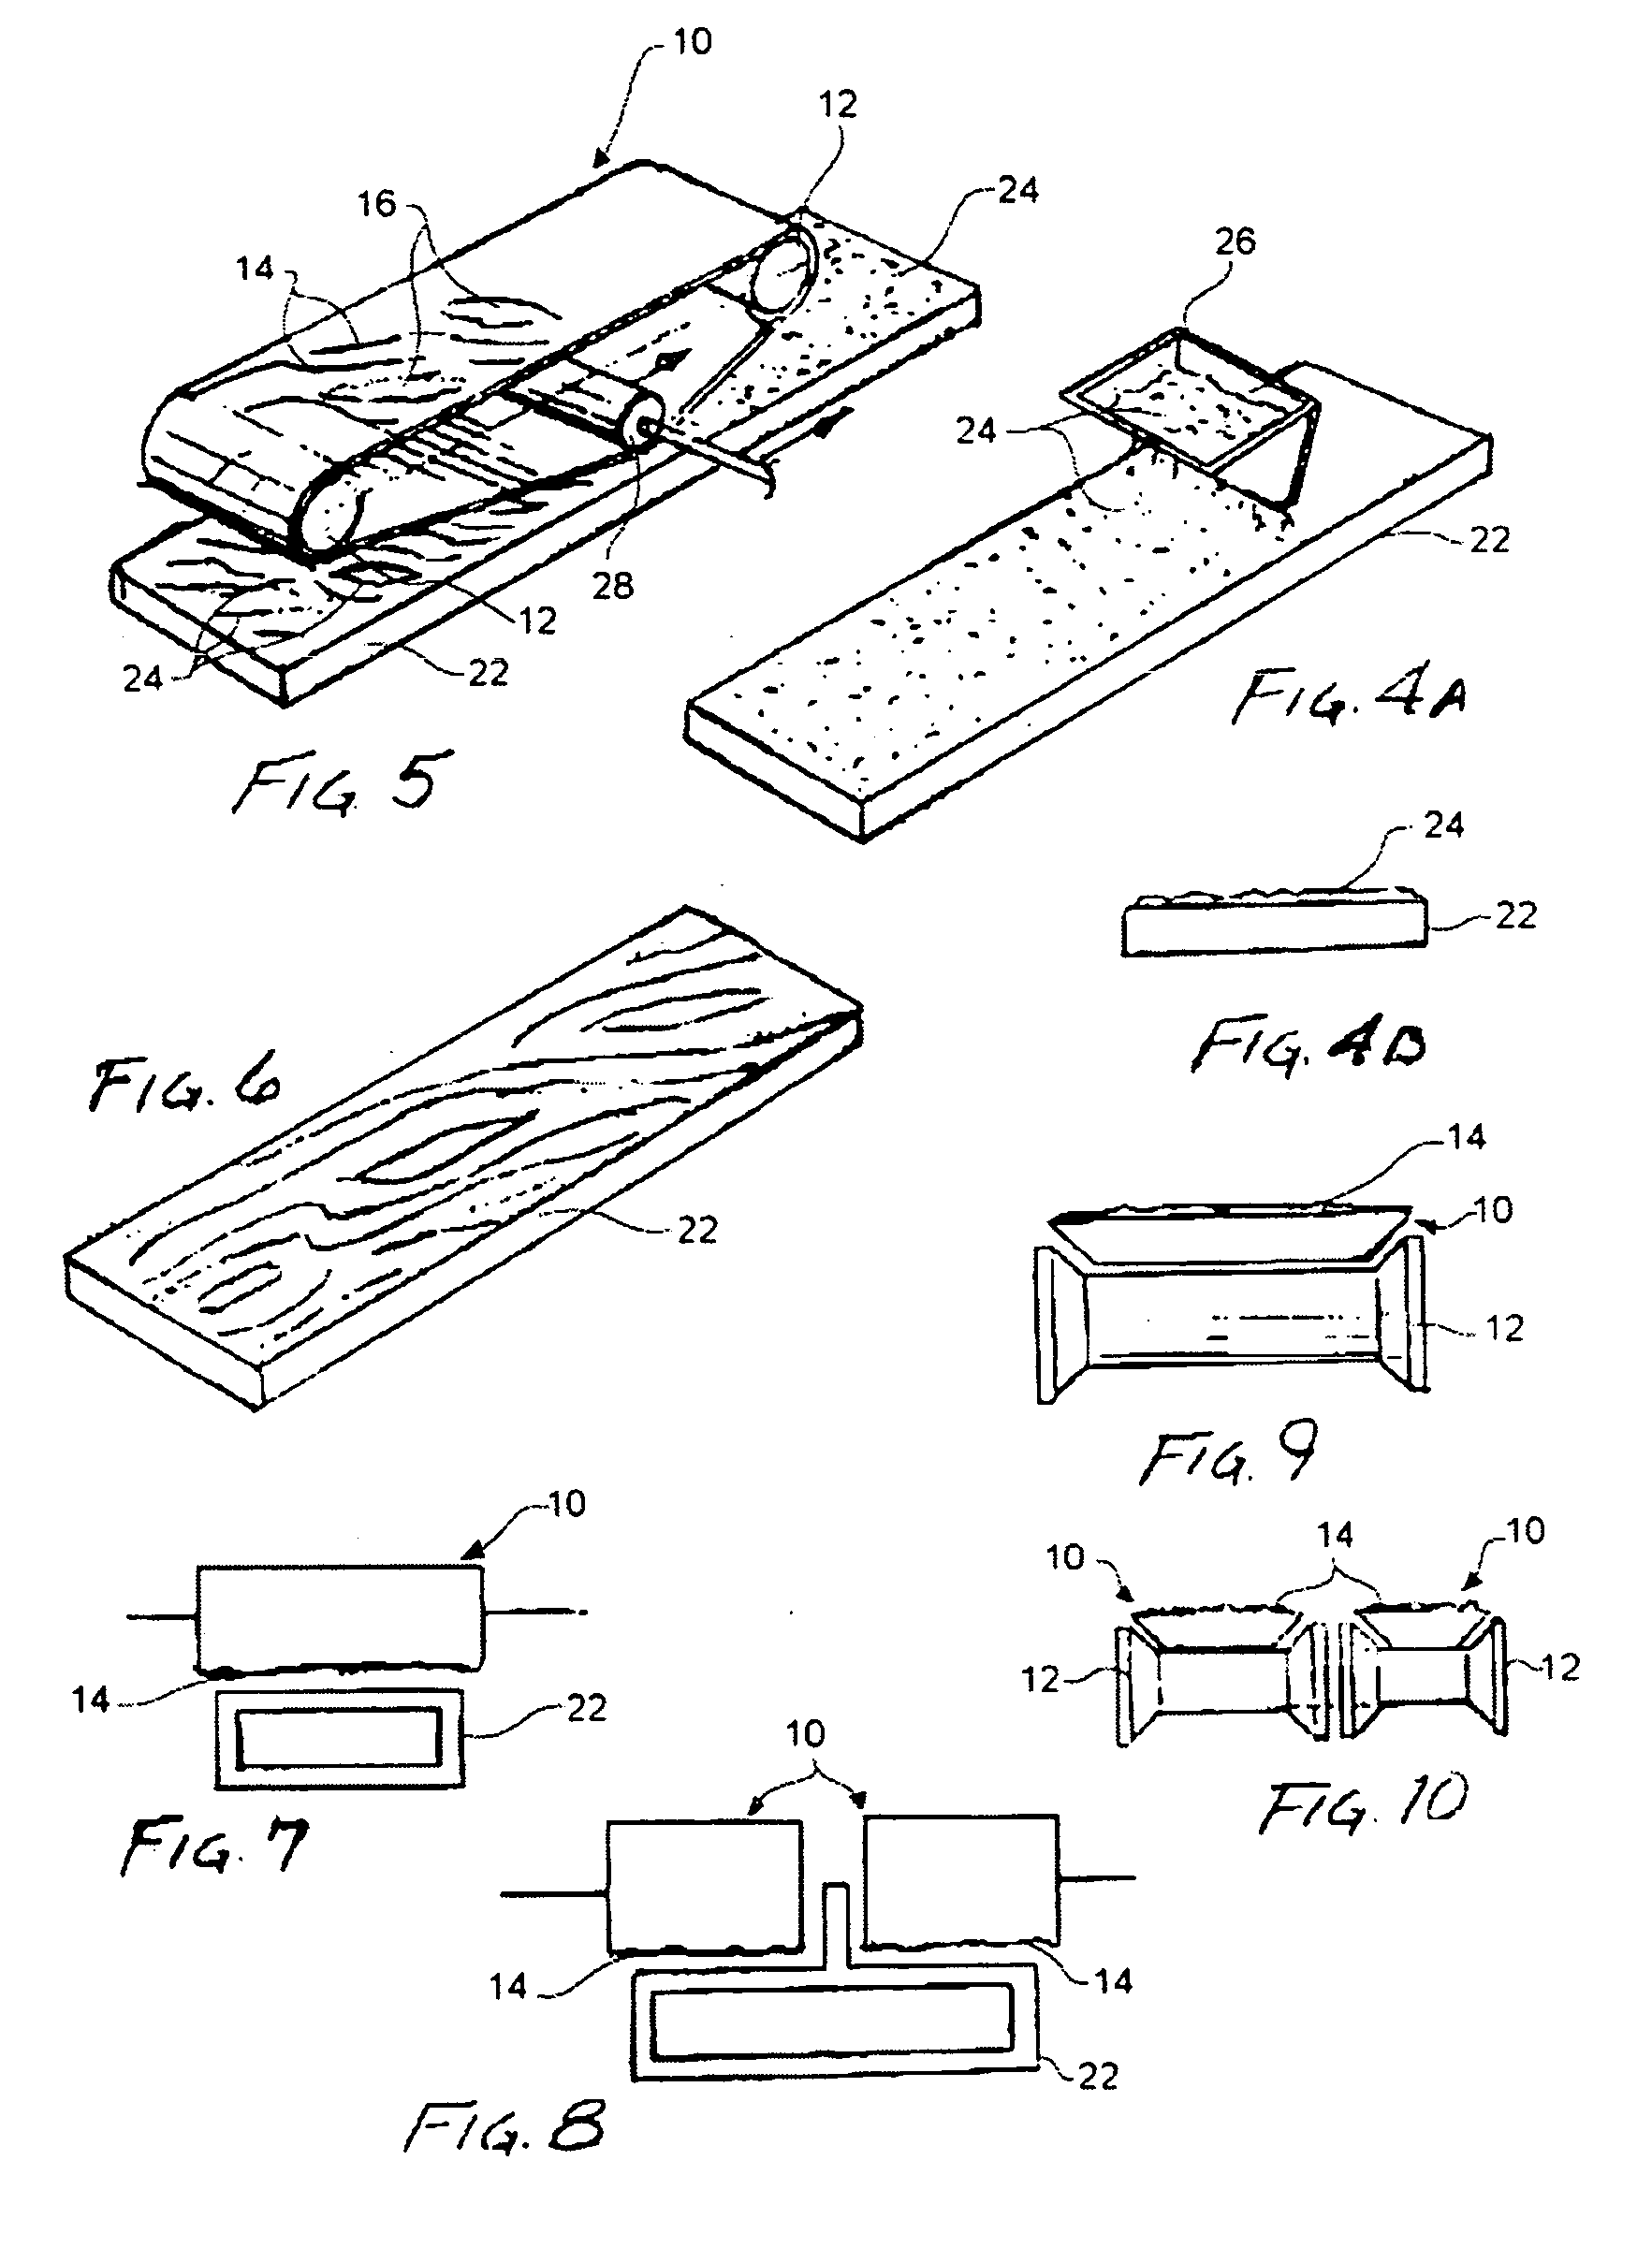 Decorative powder coated articles and methods thereof